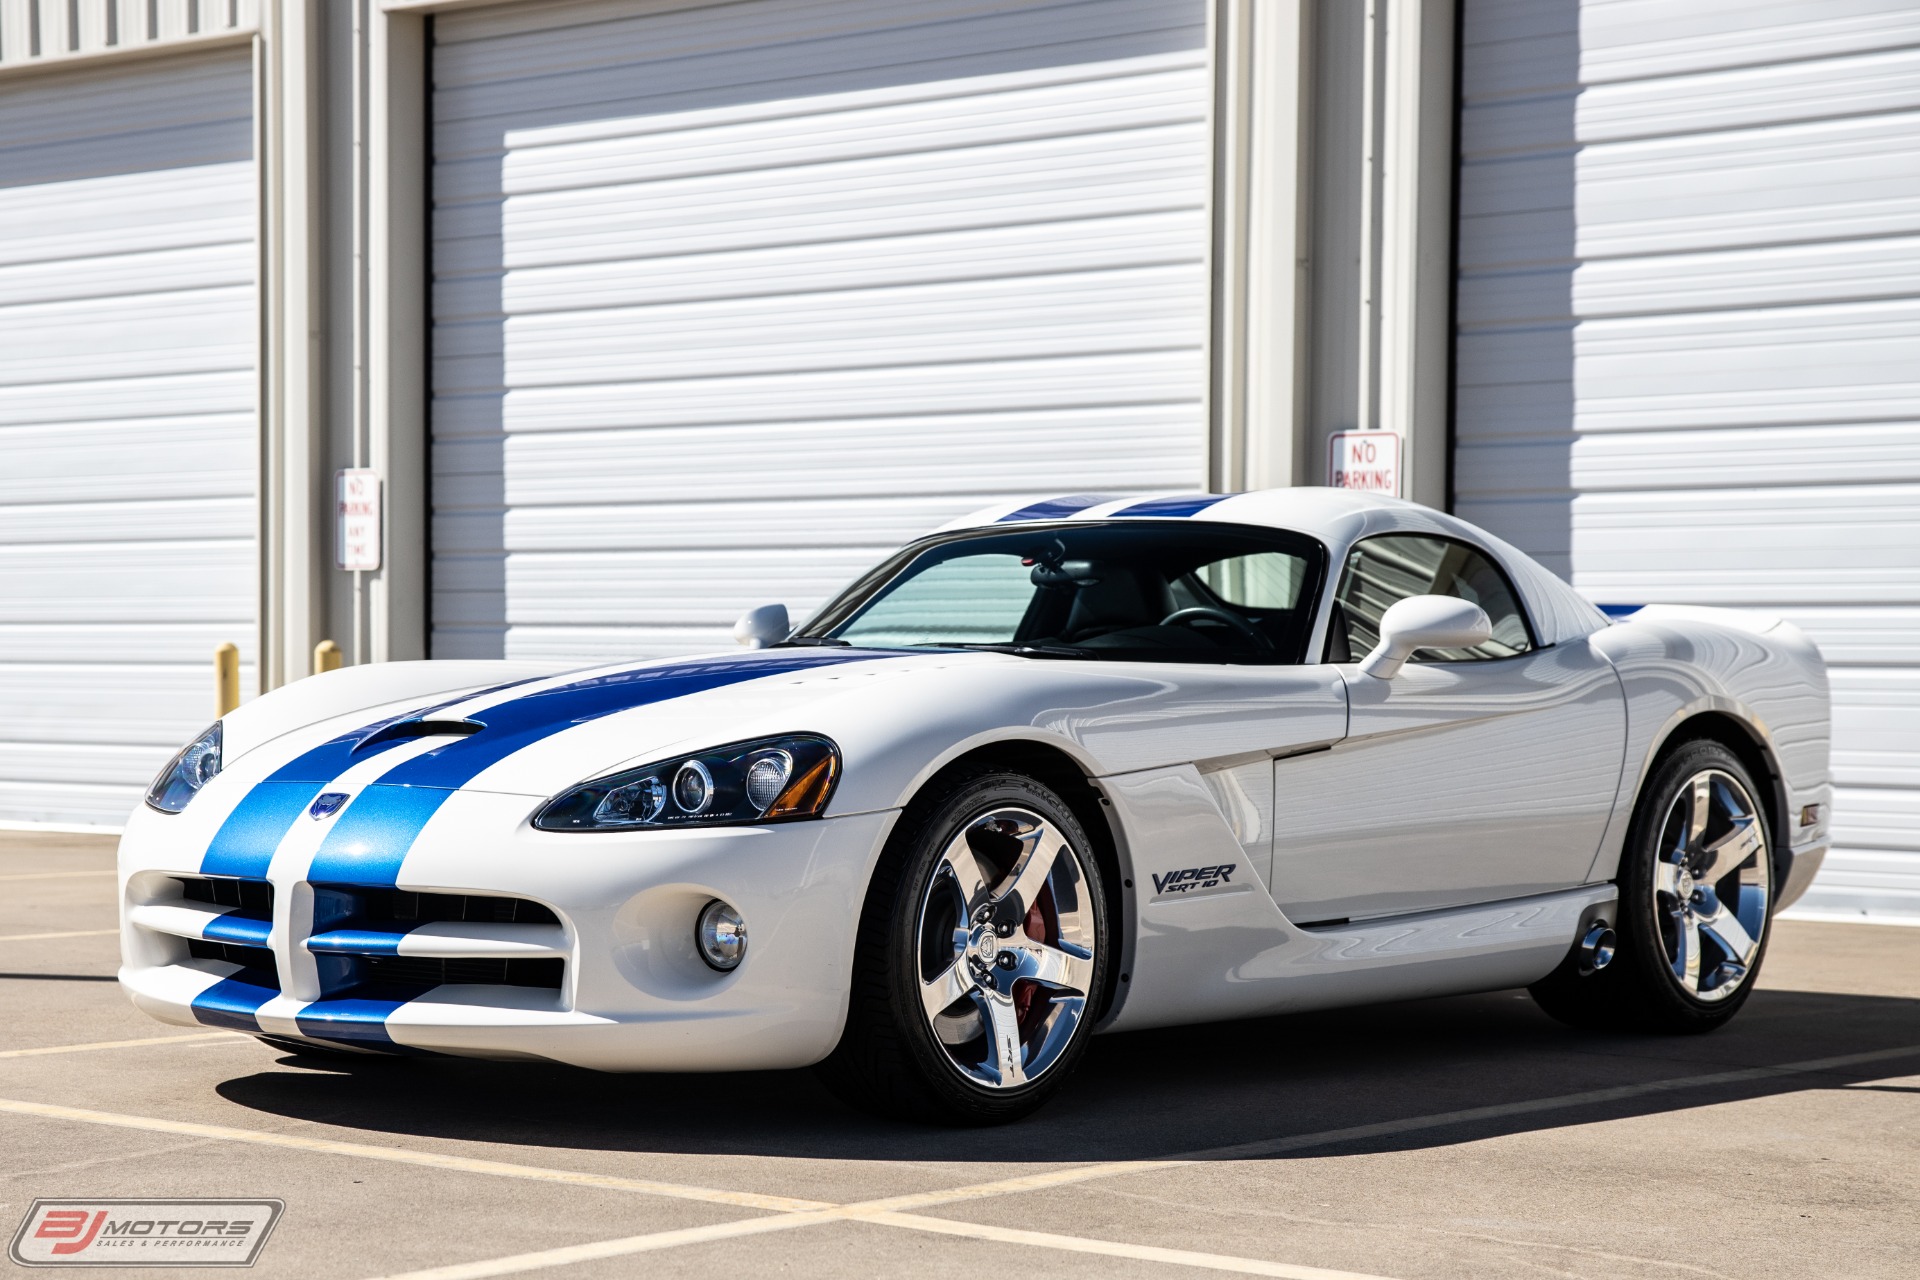 Used-2006-Dodge-Viper-VOI9-Limited-Edition